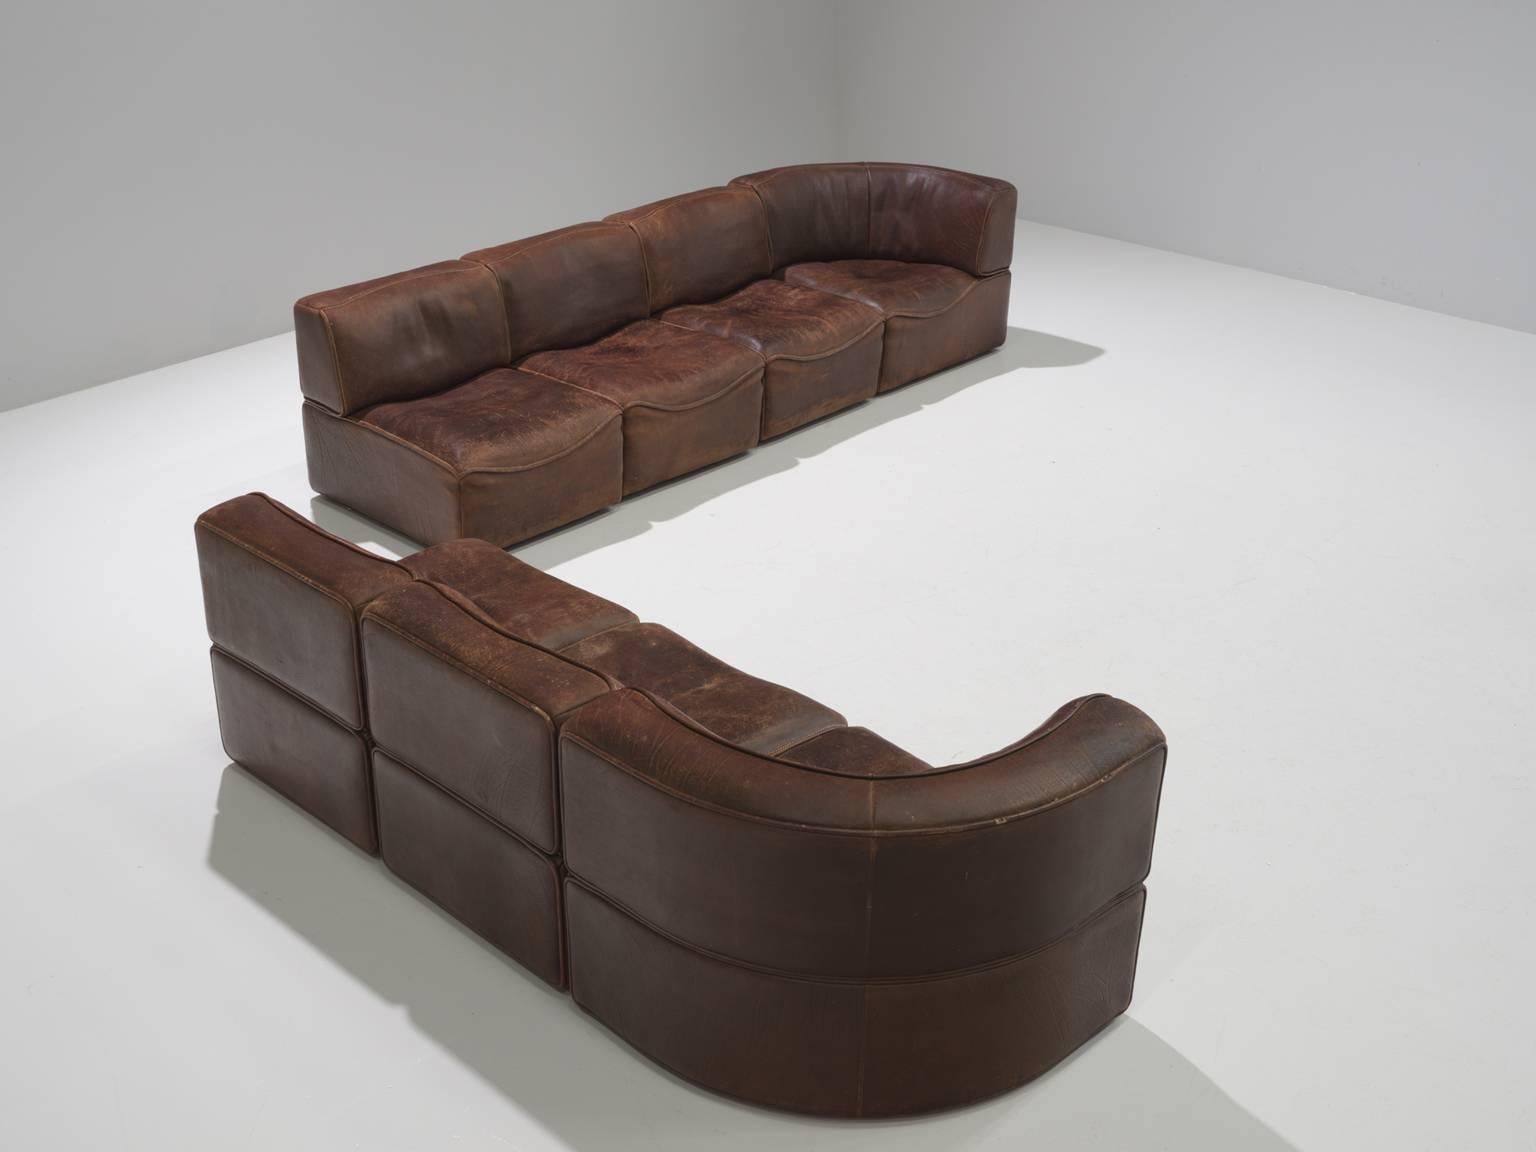 Sectional sofa model DS-15, seven elements, in dark brown leather by De Sede, Switzerland, 1970s. 

This sectional sofa contains two corner elements and five normal elements. The section make it possible to arrange this sofa to your own wishes. The